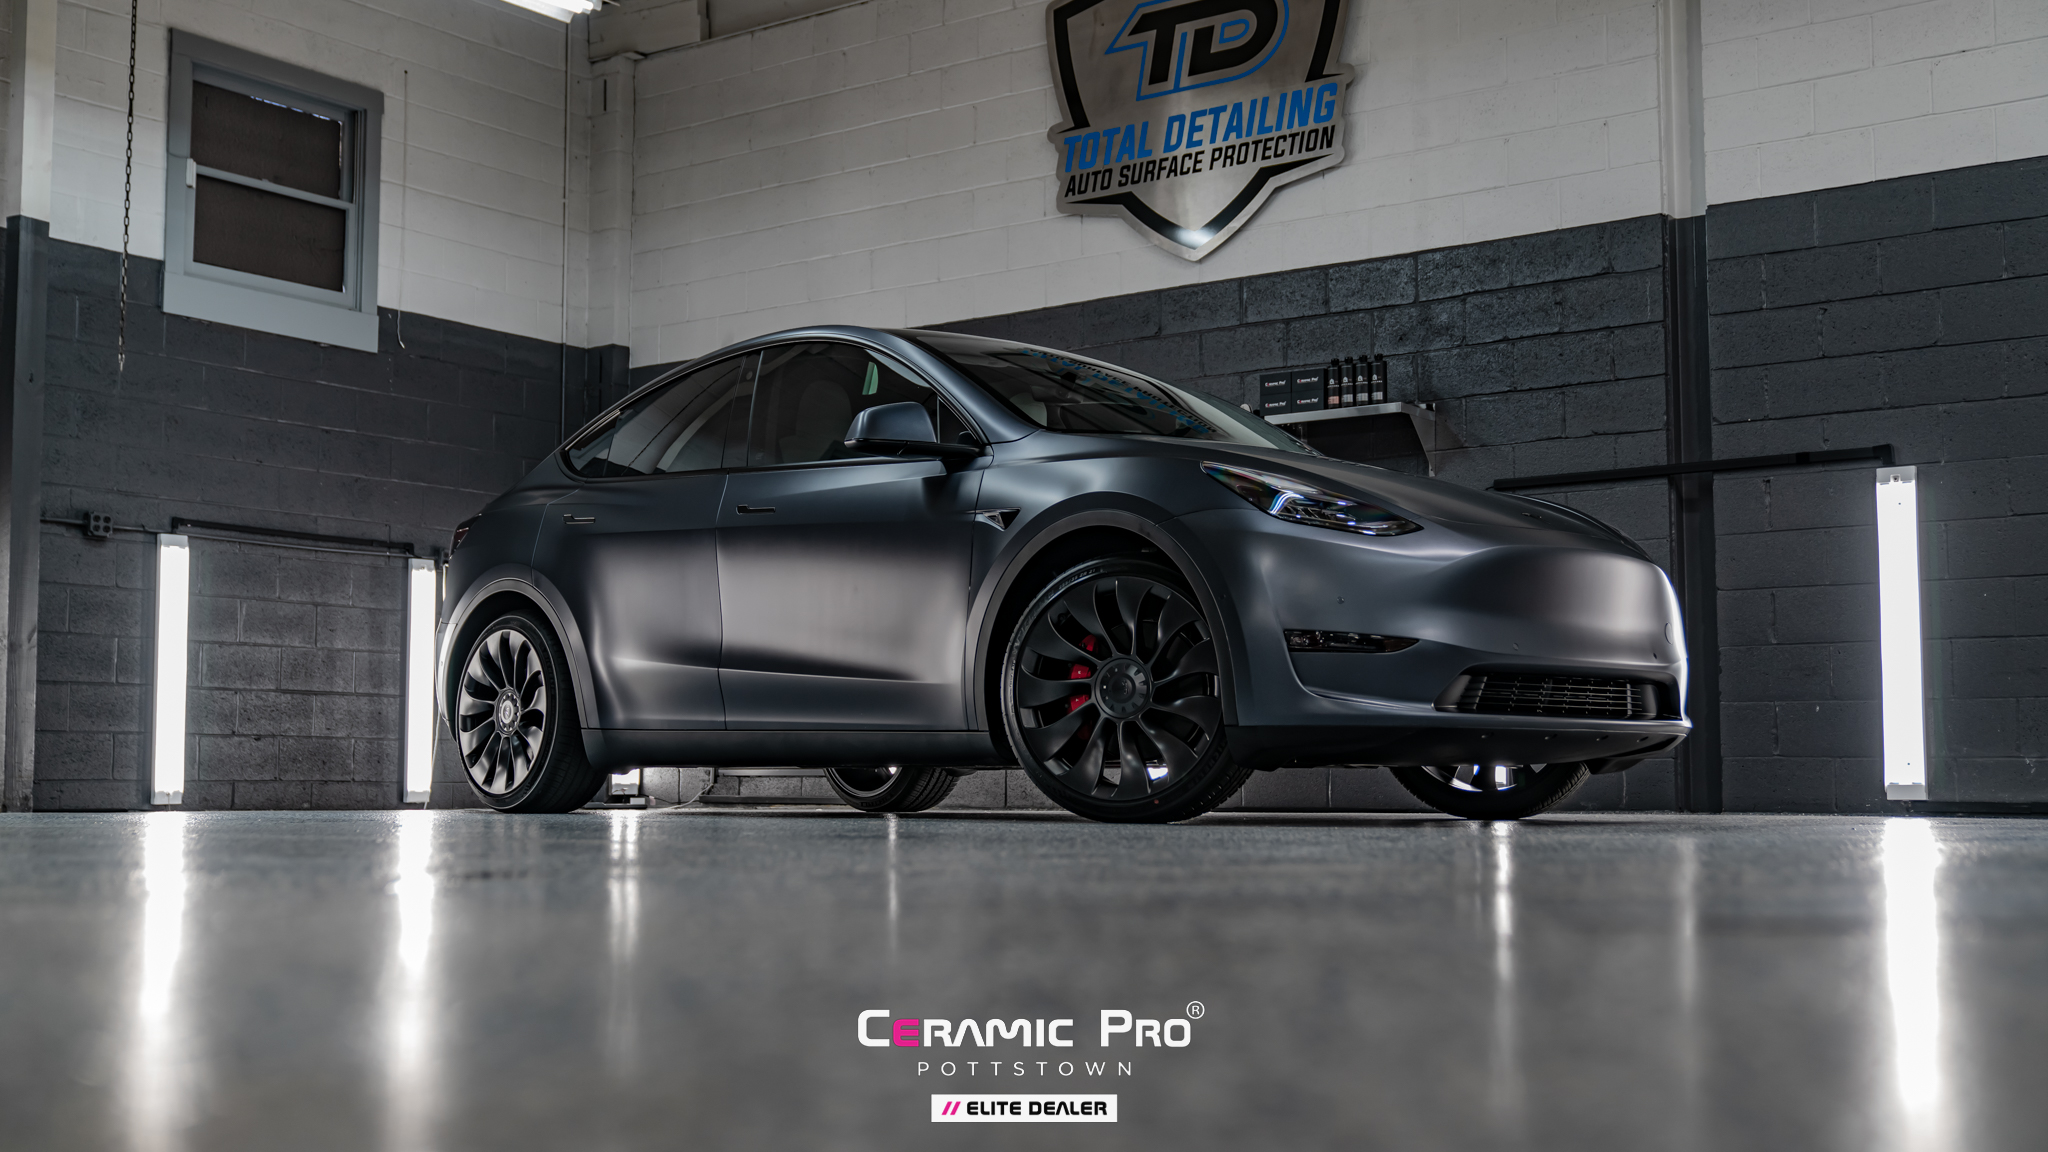 Installing Matte Tesla Paint Protection Film can protect your vehicle and make it look great.